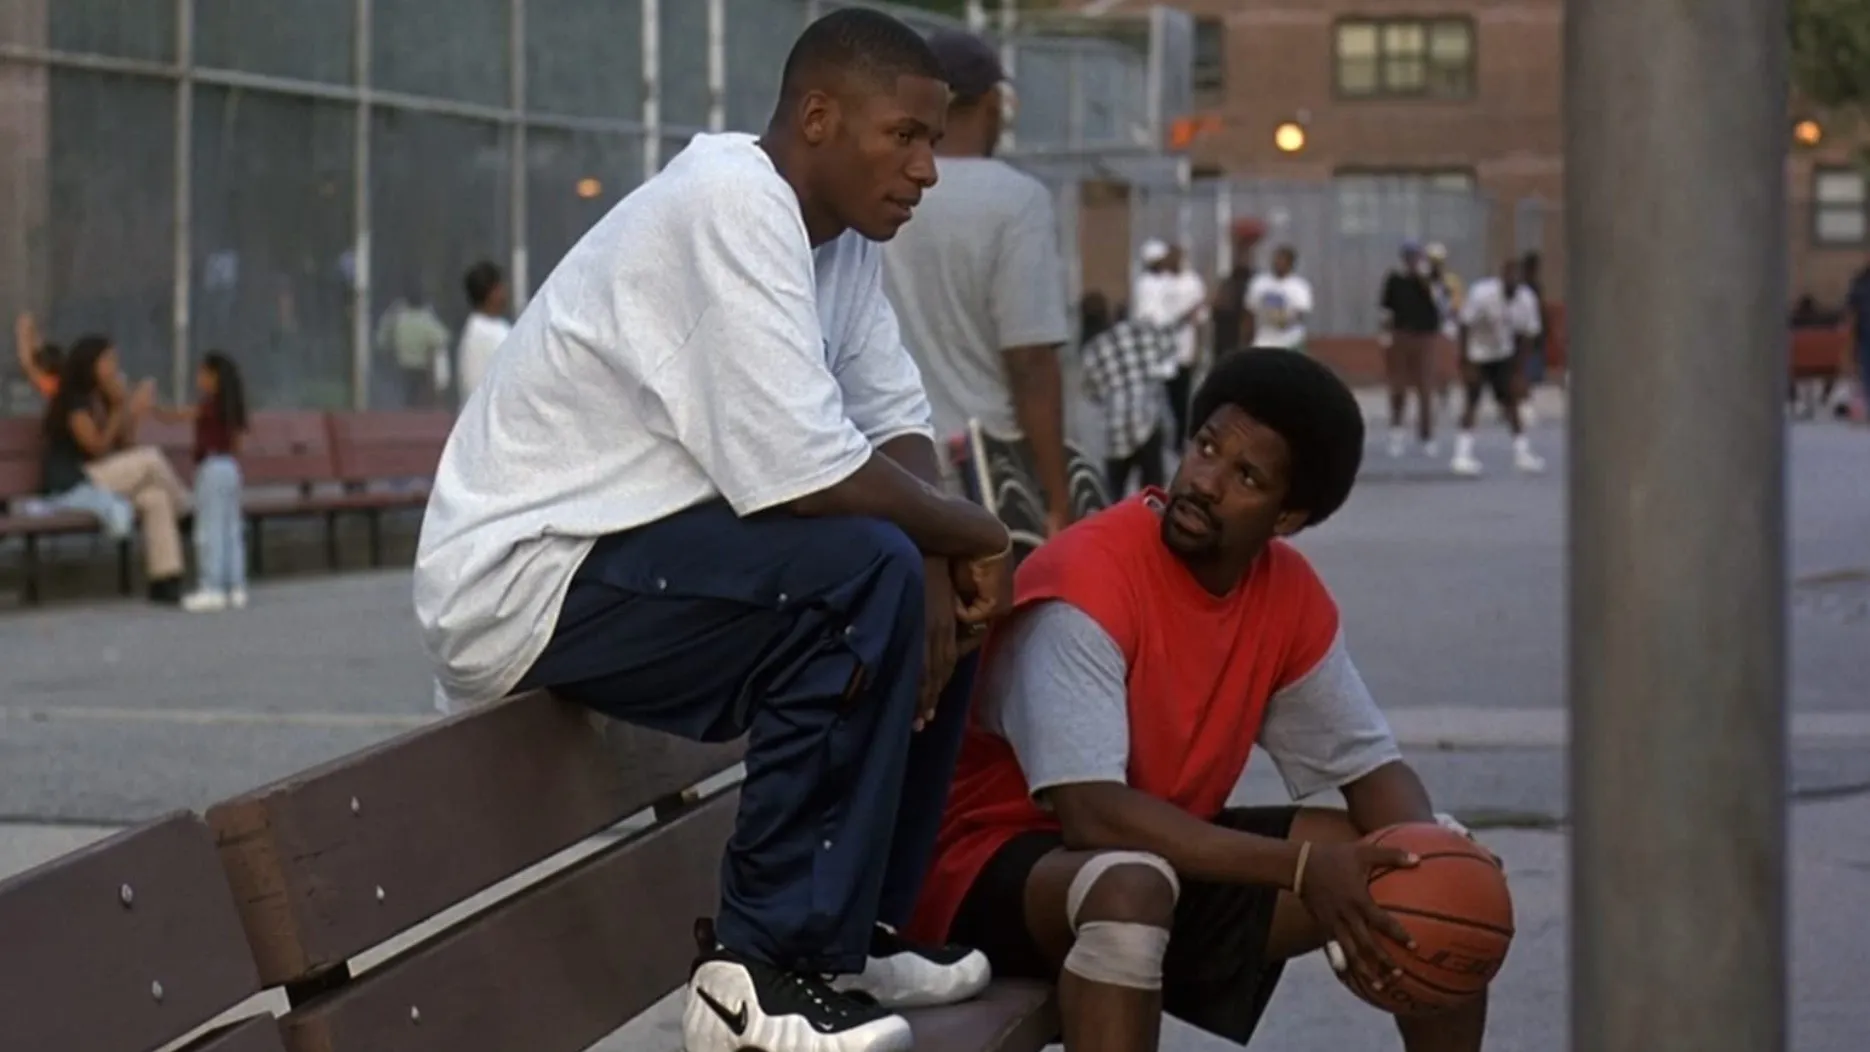 Spike Lee’s ‘He Got Game’ turns 25. The first time I saw it, I hated it.